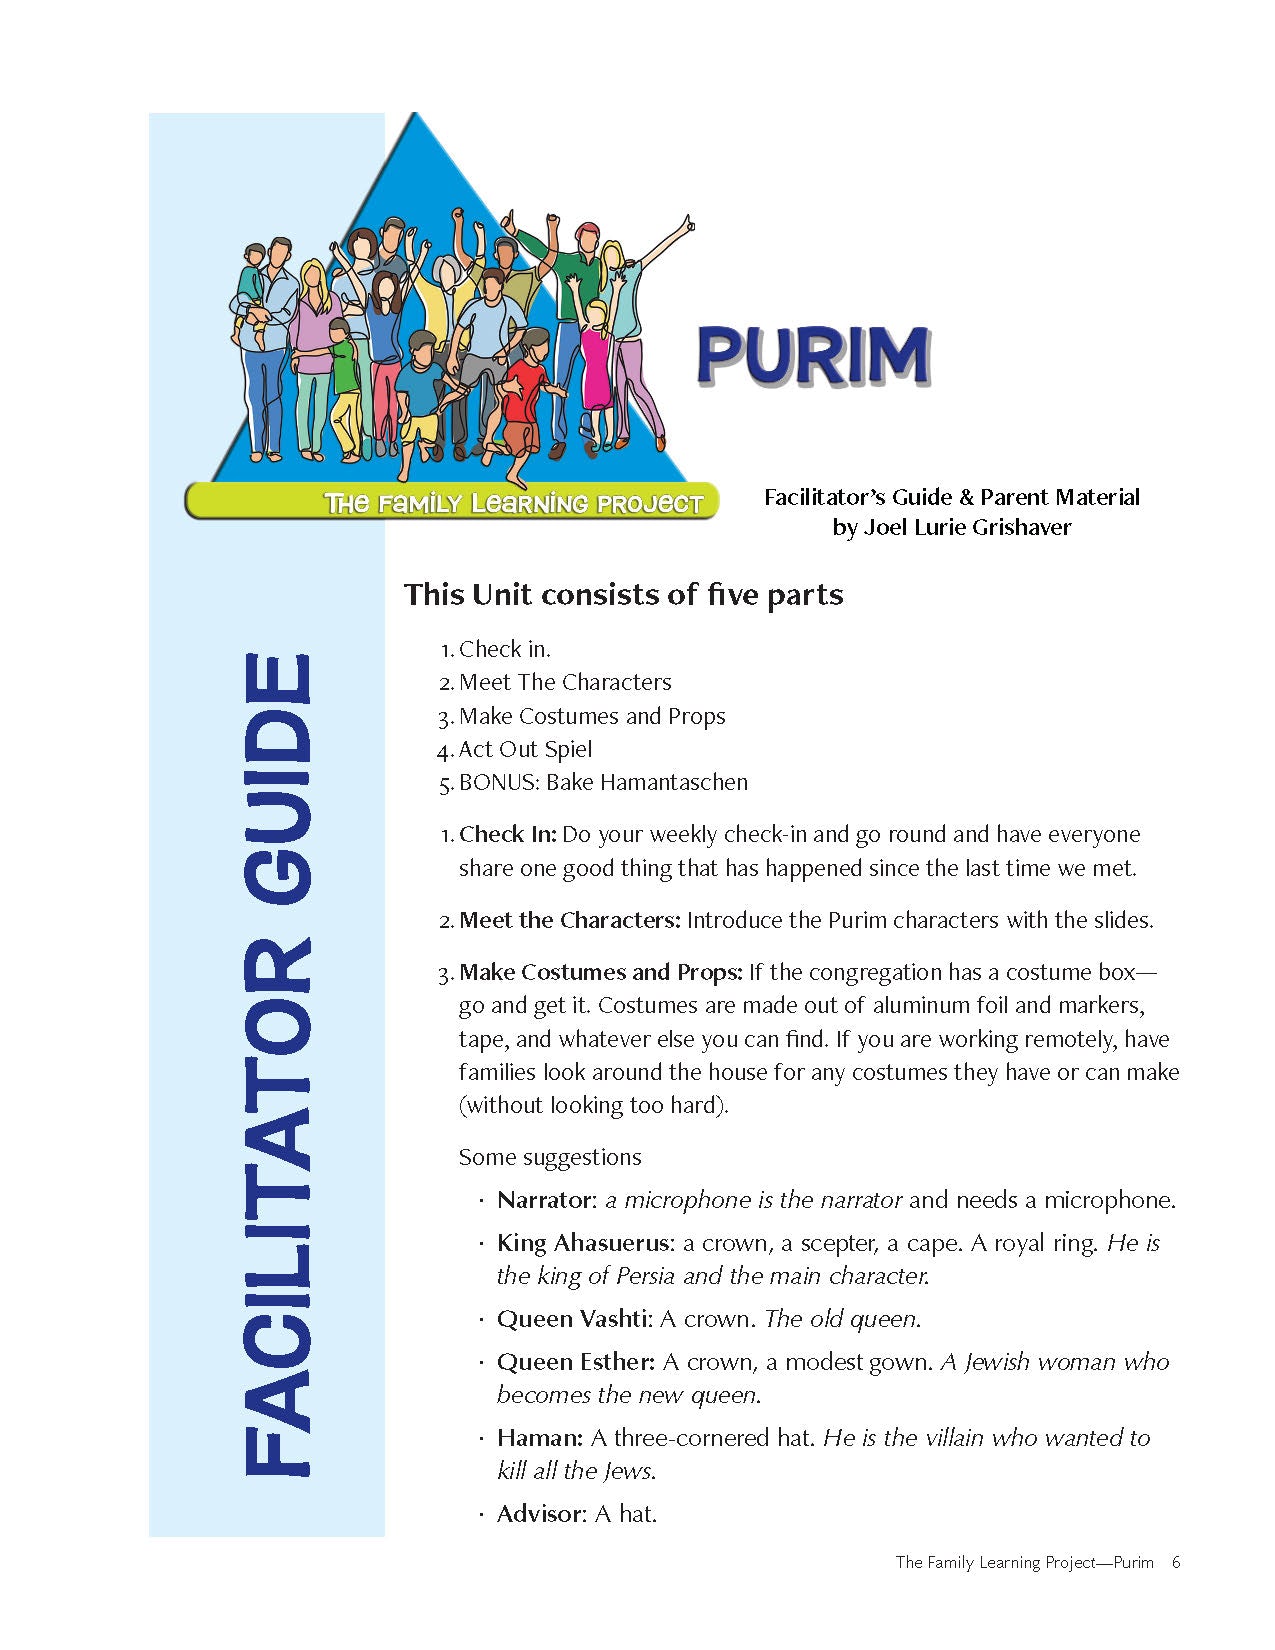 Family Learning Project: Purim